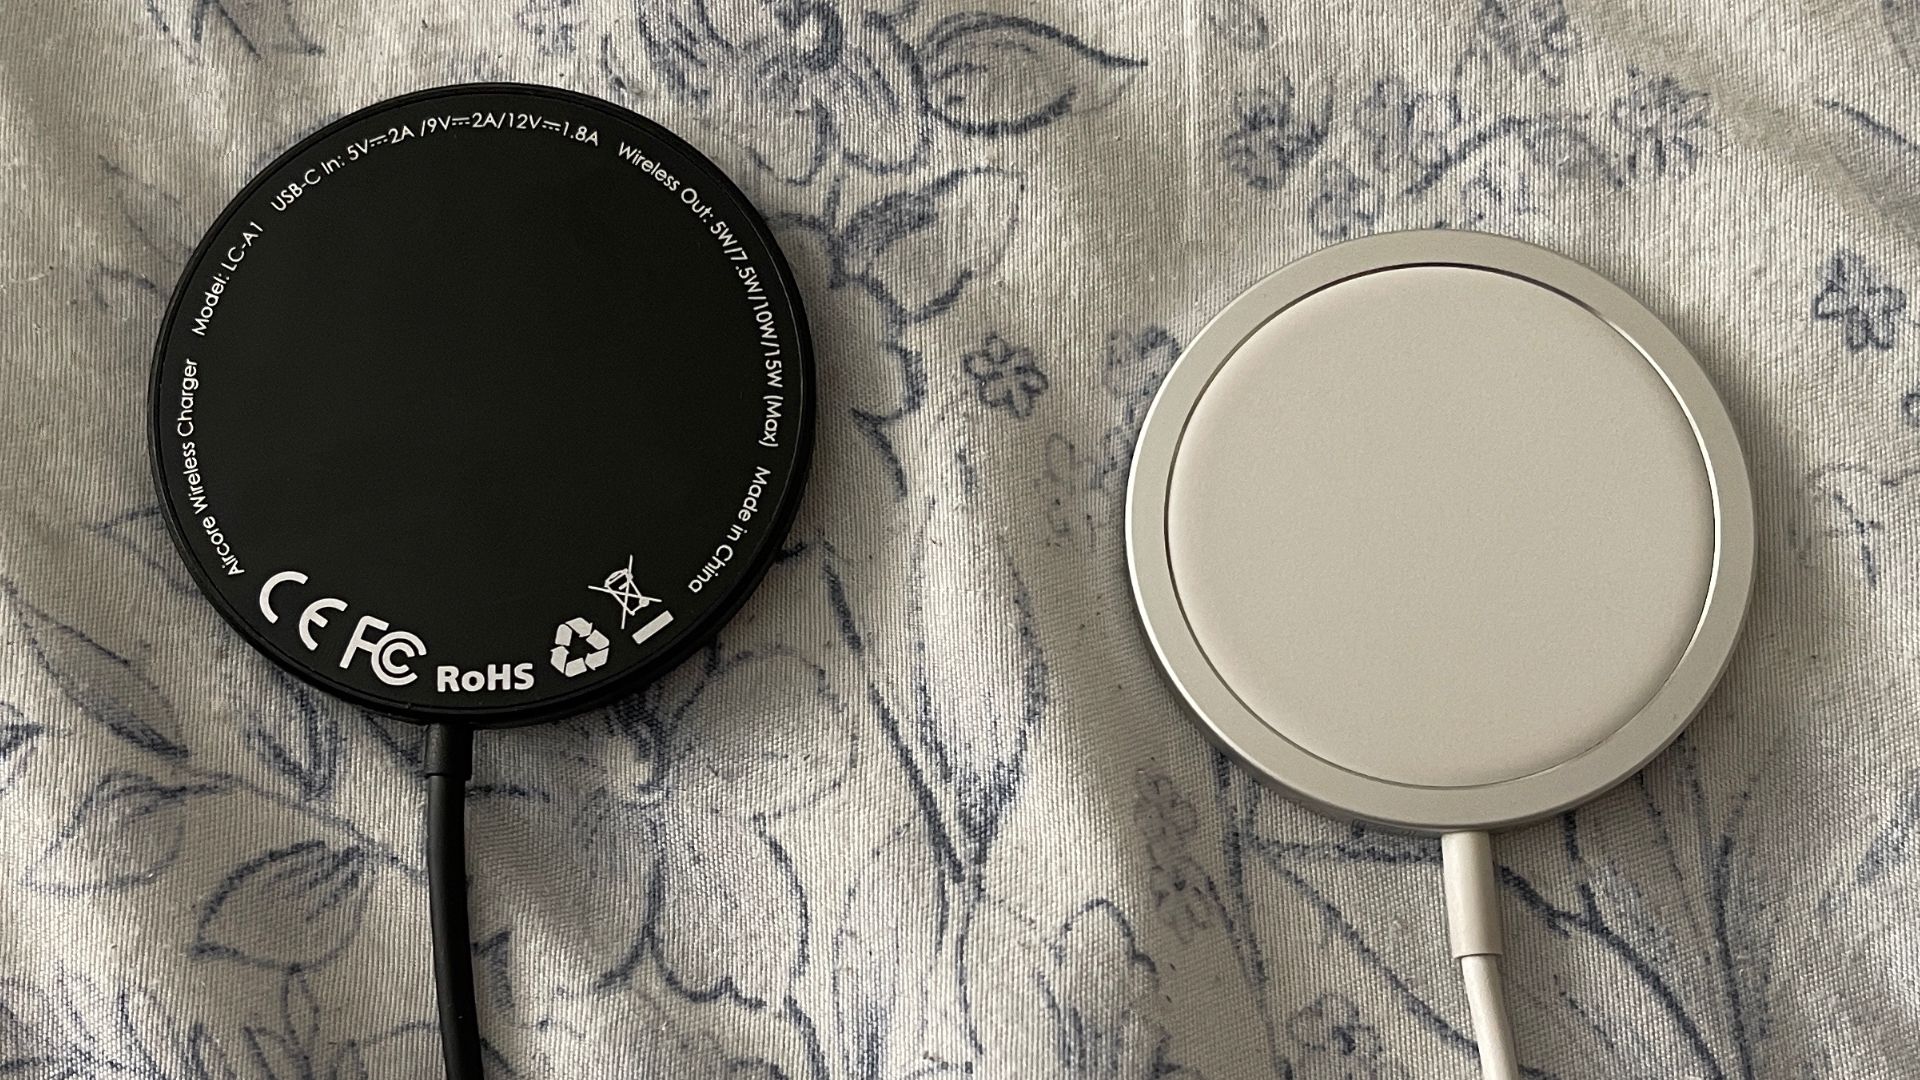 Aukey Aircore wireless charger vs. Apple MagSafe charger